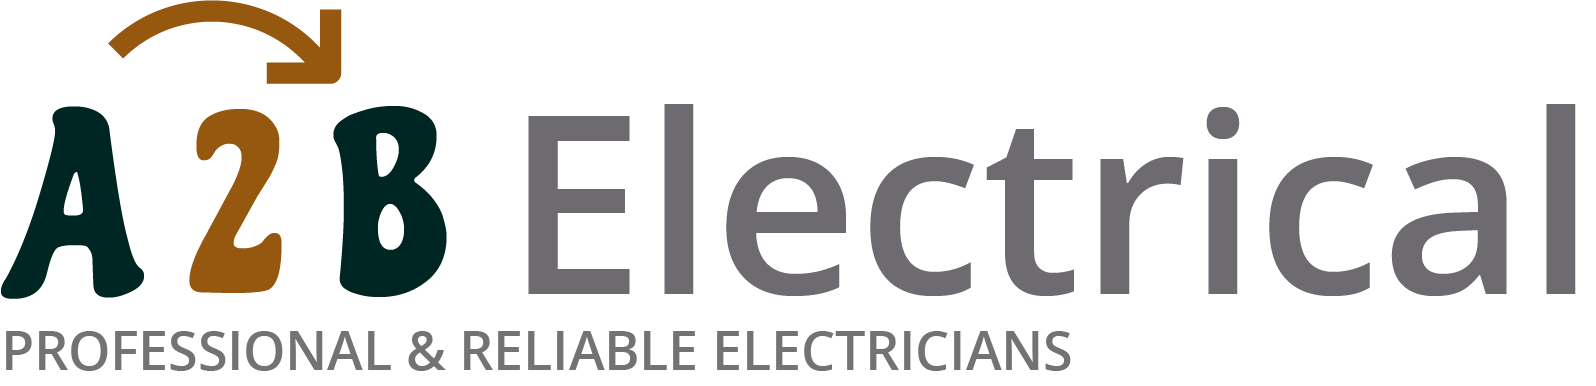 If you have electrical wiring problems in Hetton Le Hole, we can provide an electrician to have a look for you. 